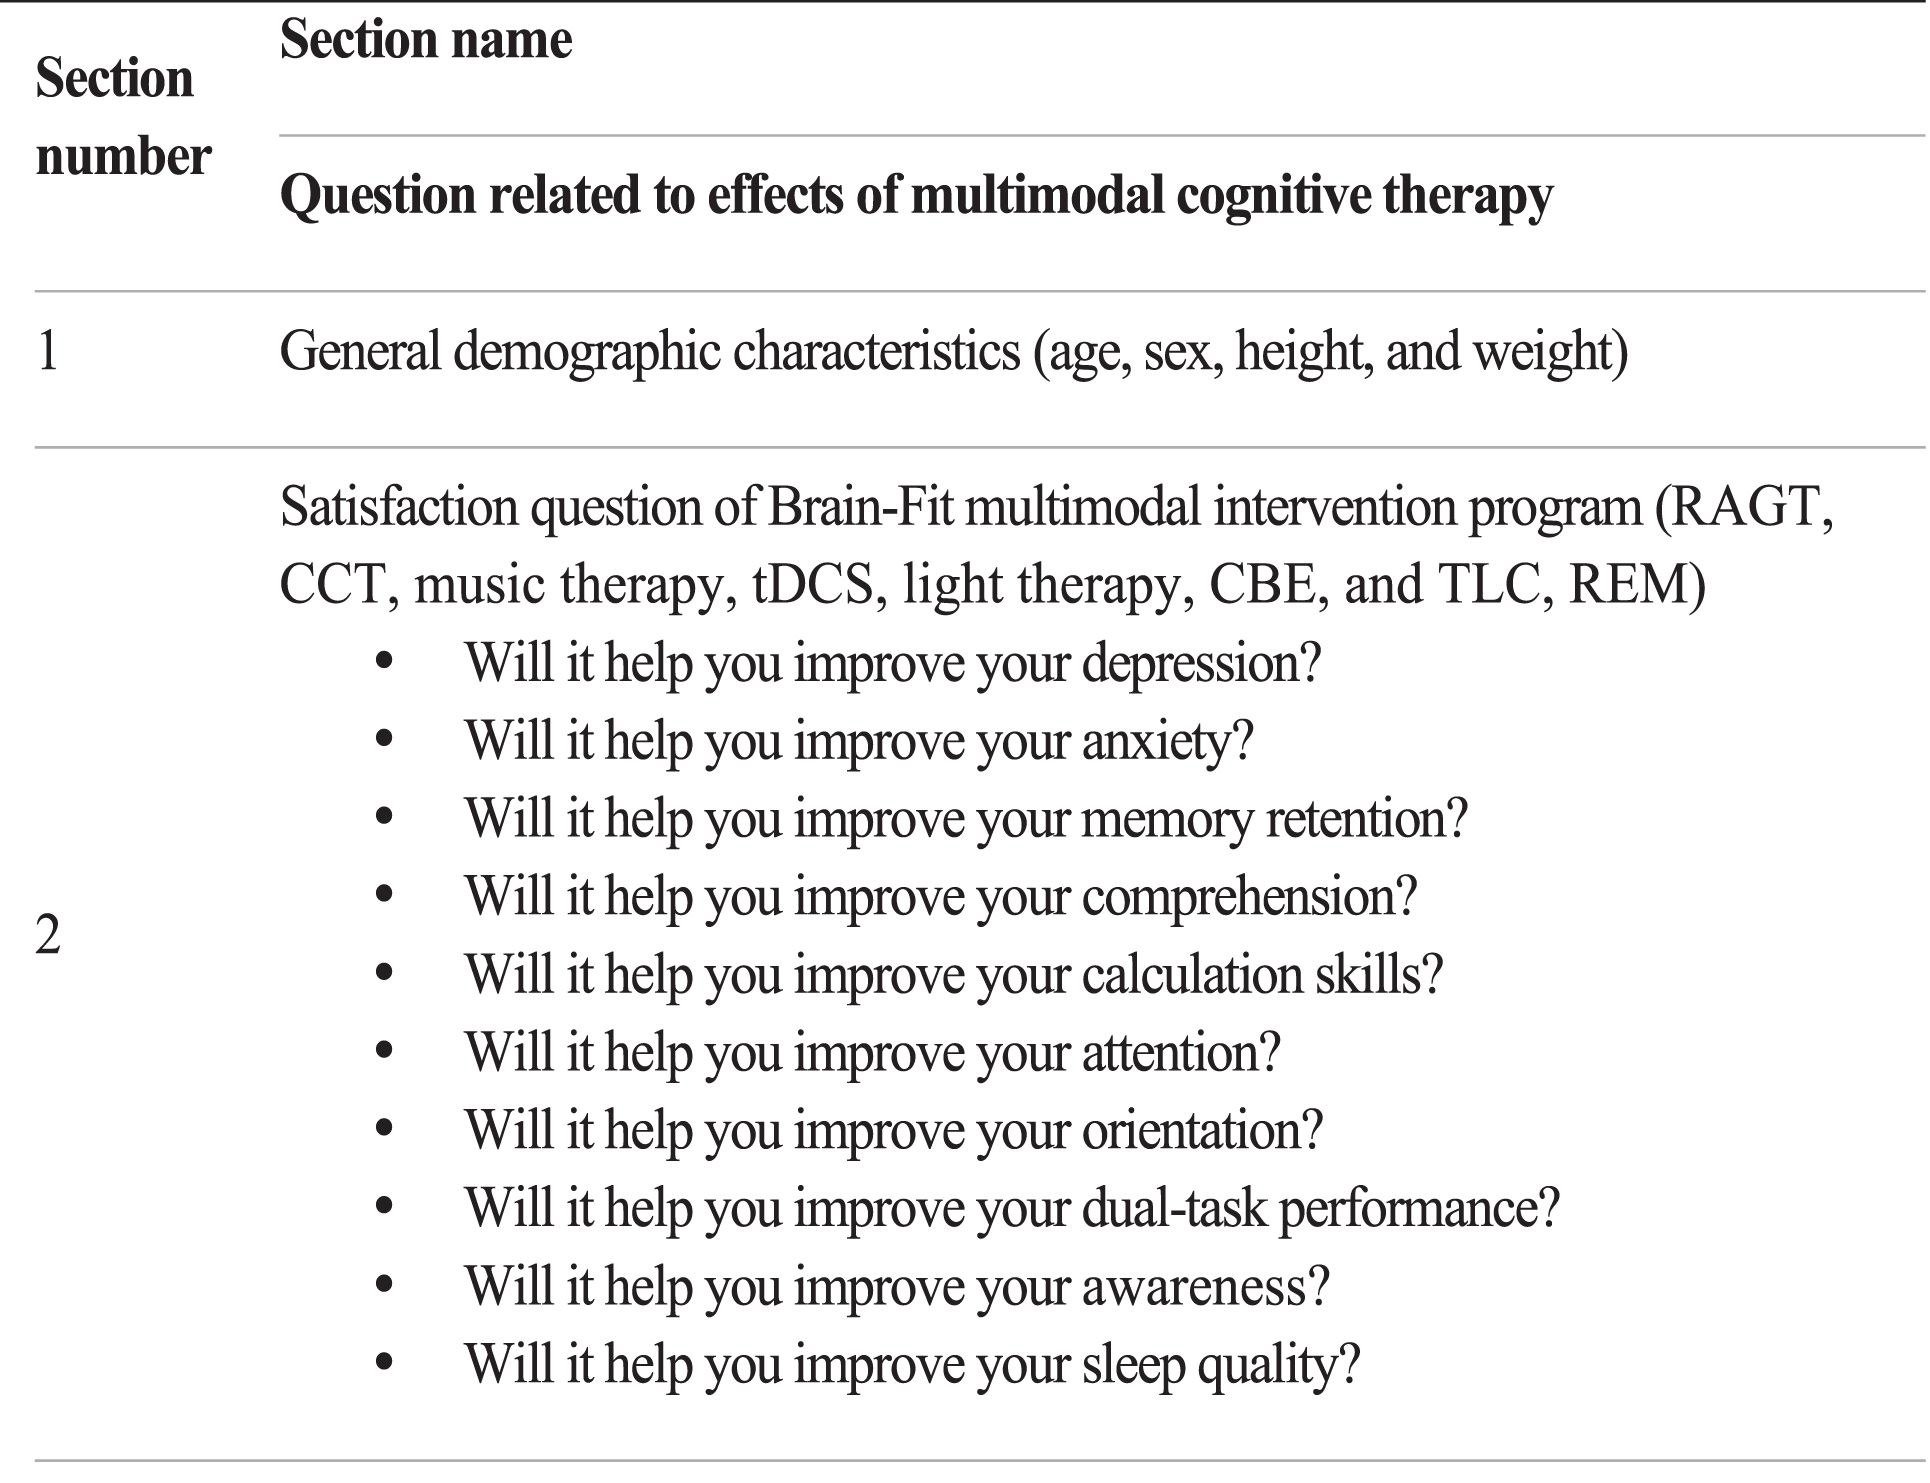 Survey questionnaire for demographic characteristics and satisfaction levels.